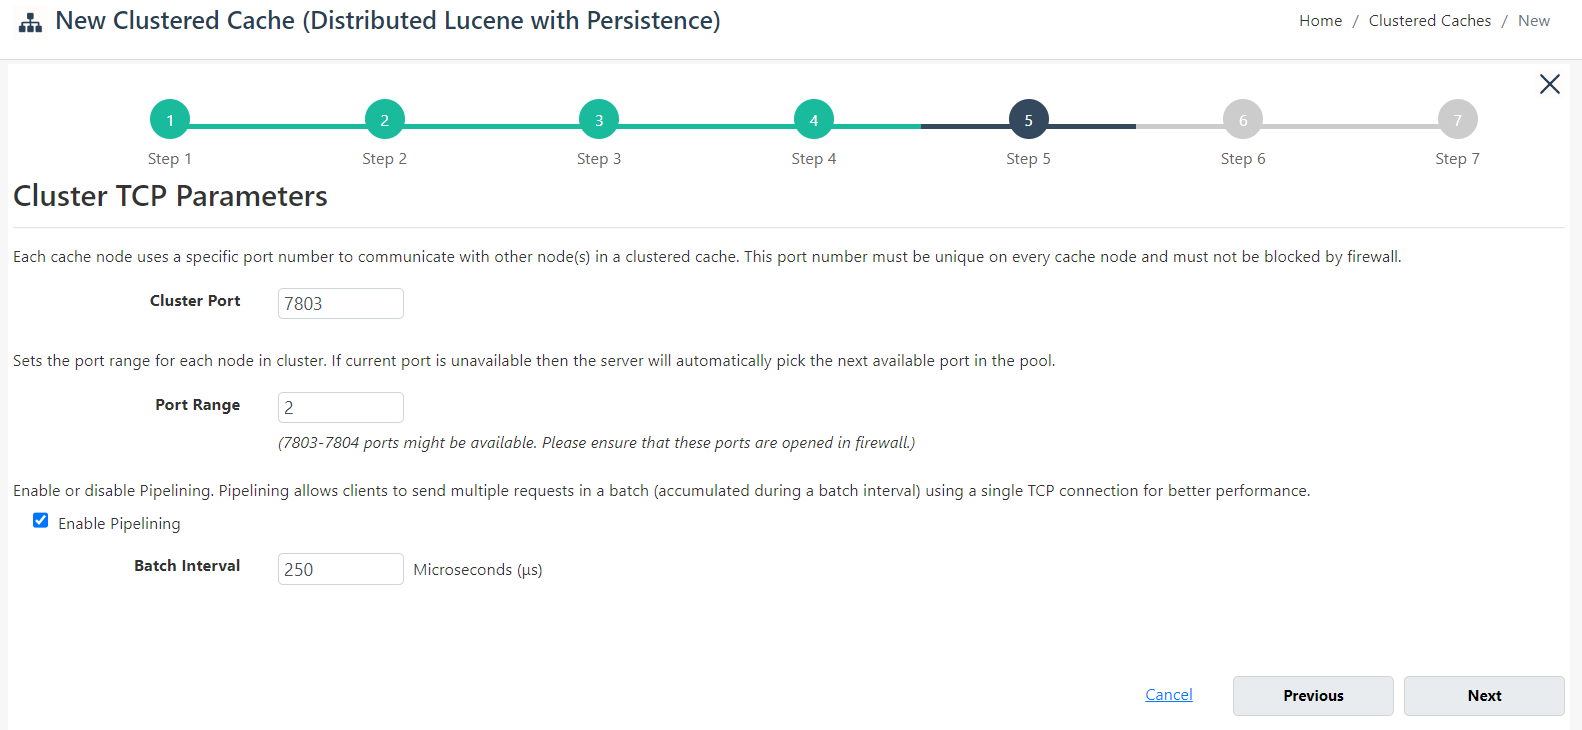 Distributed Lucene 5